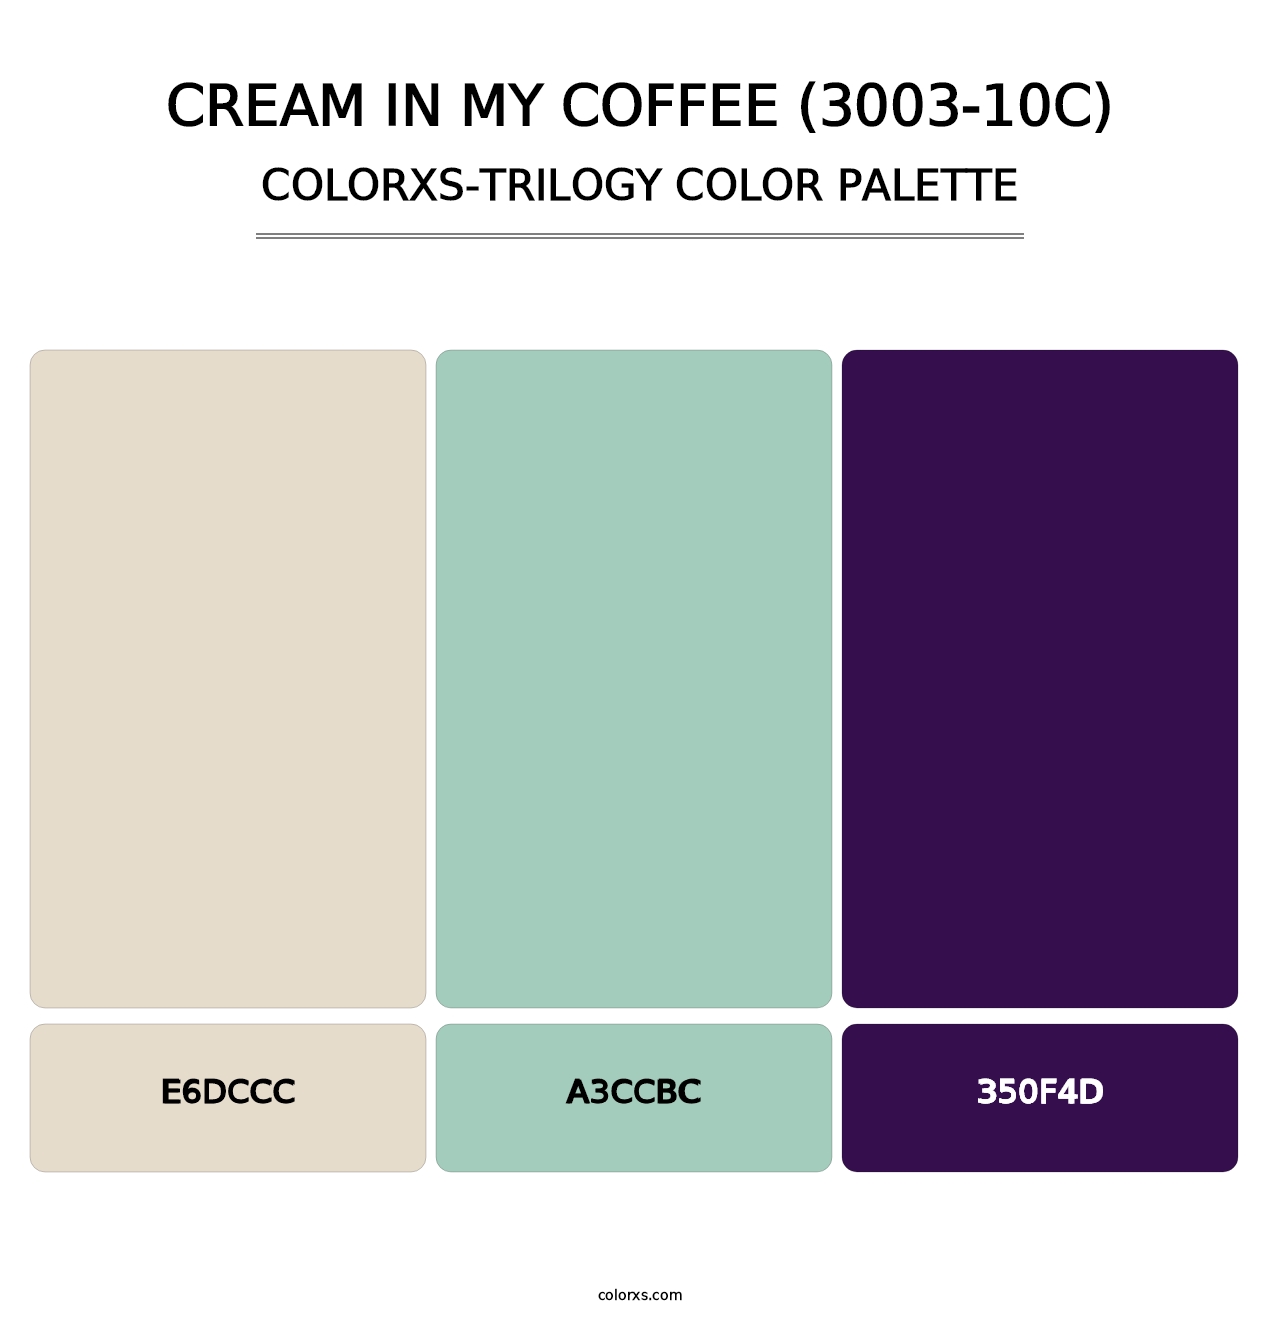 Cream in My Coffee (3003-10C) - Colorxs Trilogy Palette